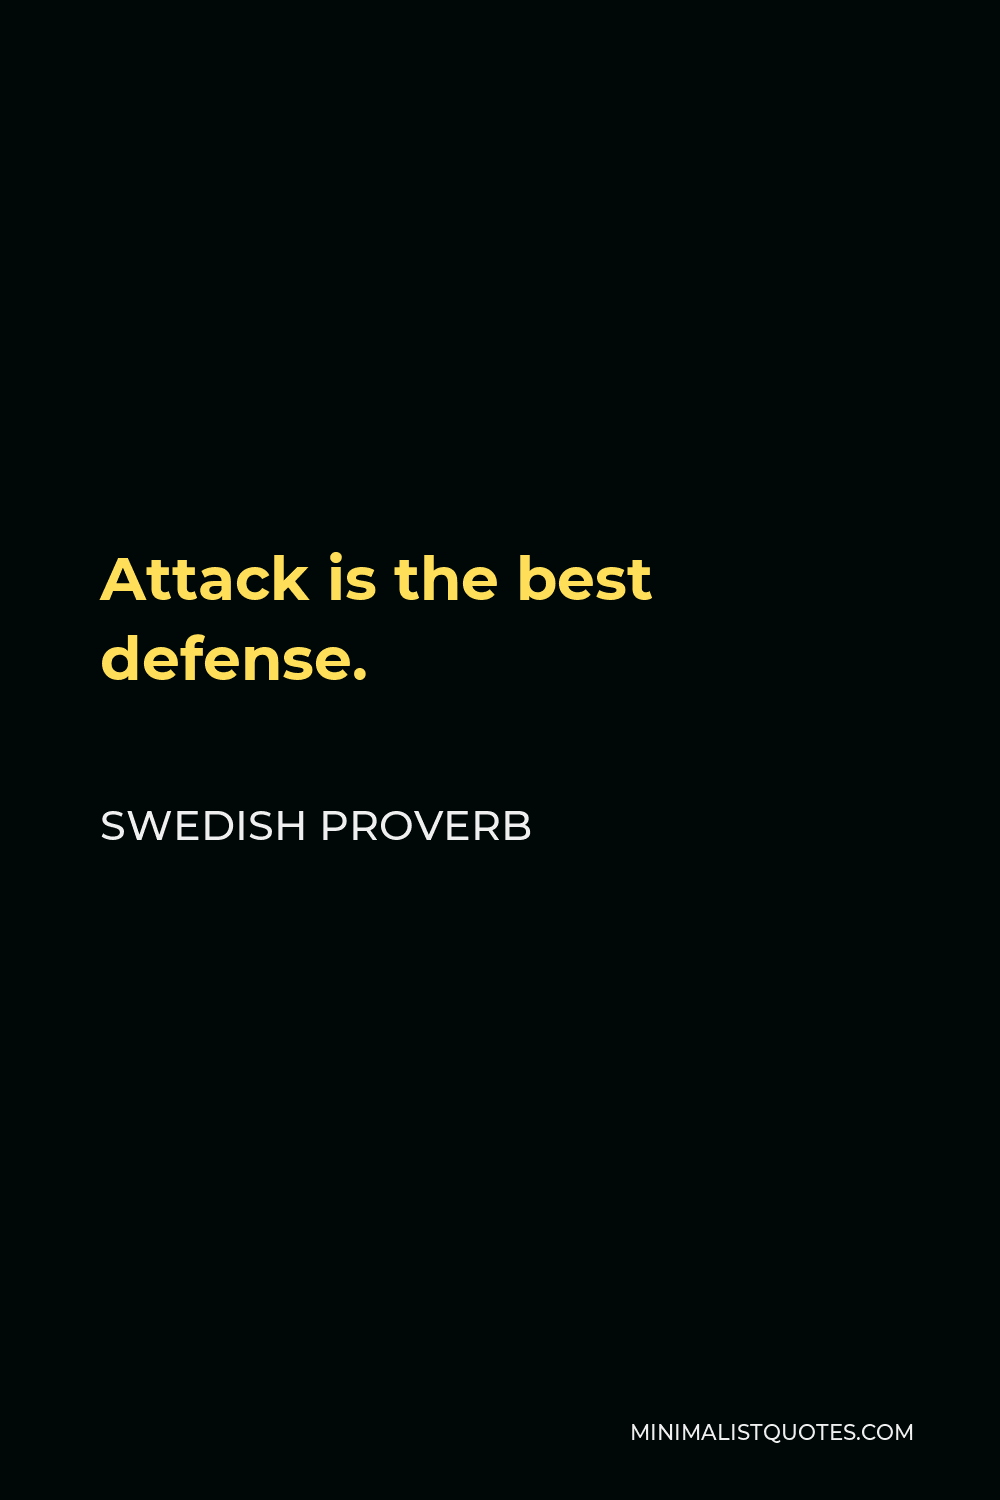 Swedish Proverb Quote - Attack is the best defense.